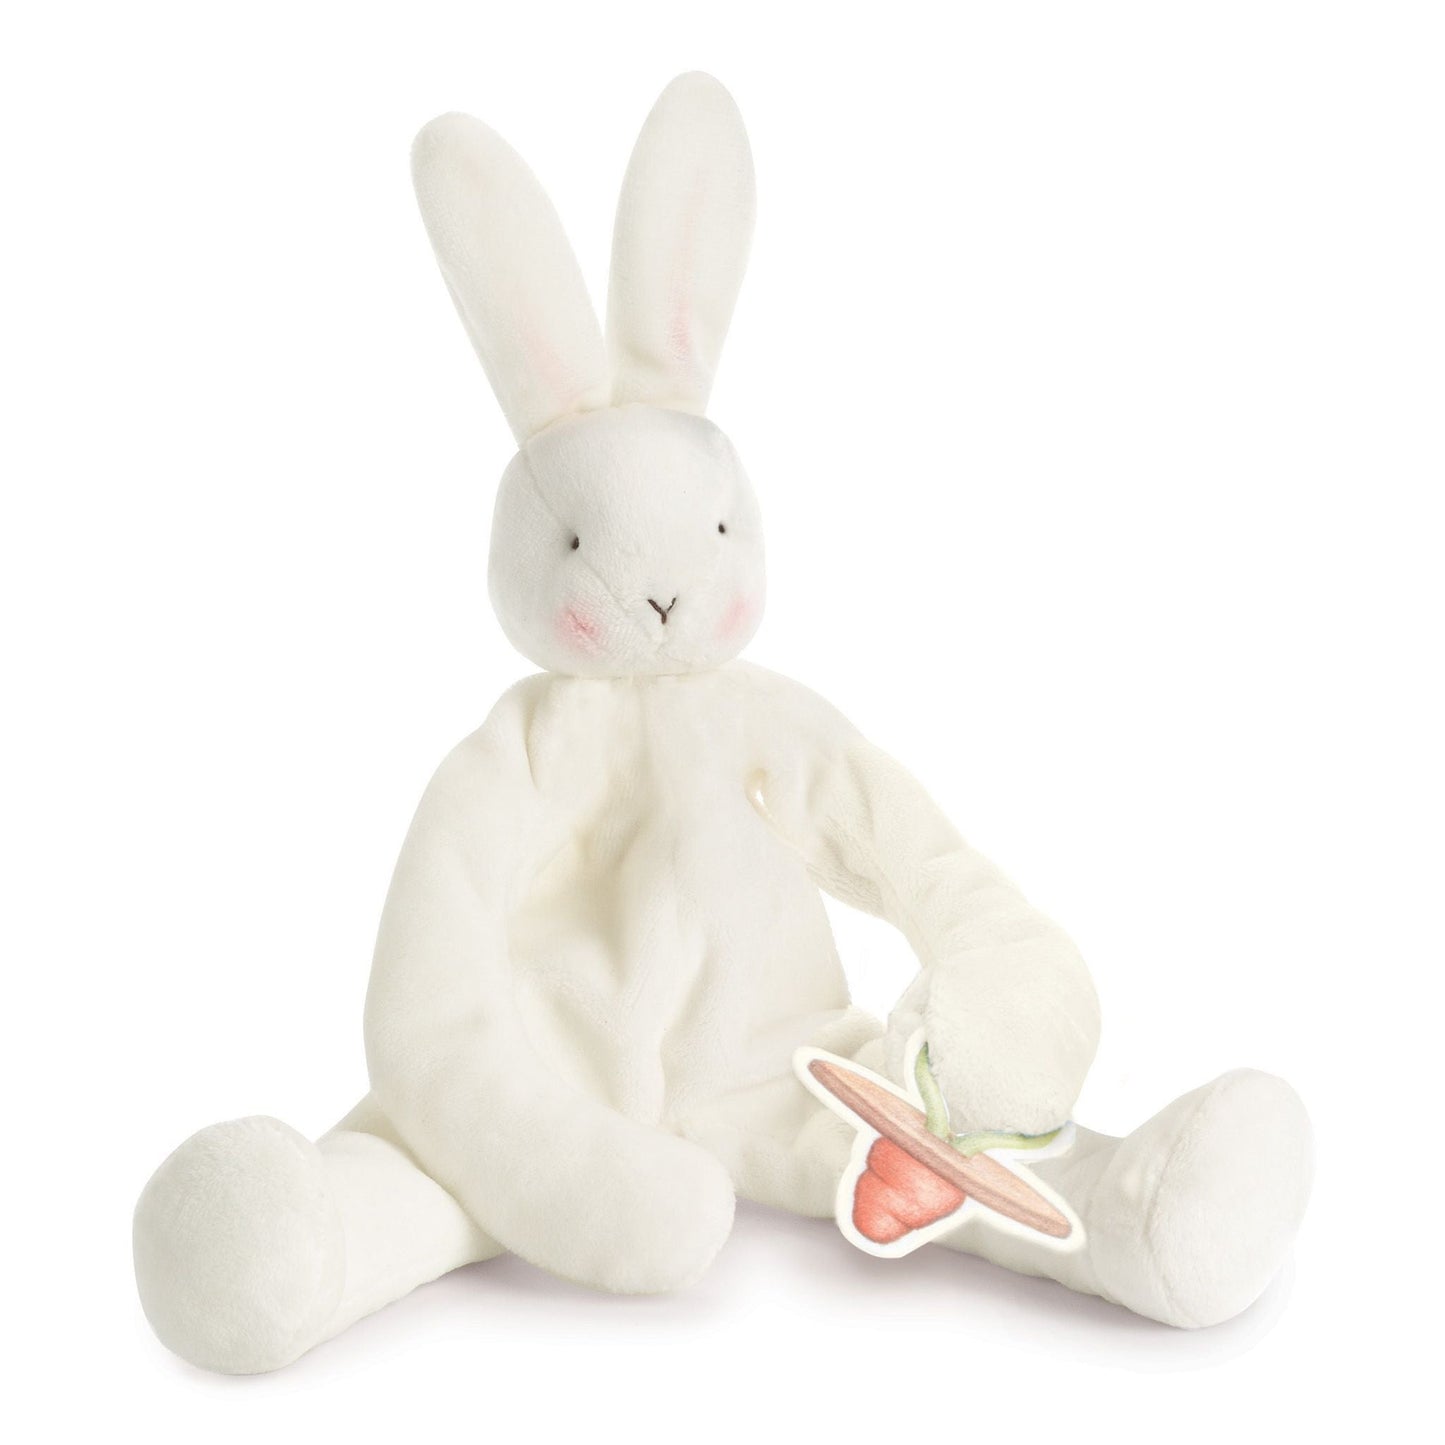 Bunnies by the bay soft and cuddly baby plush toy & pacifier holder - BUN BUN white plush bunny